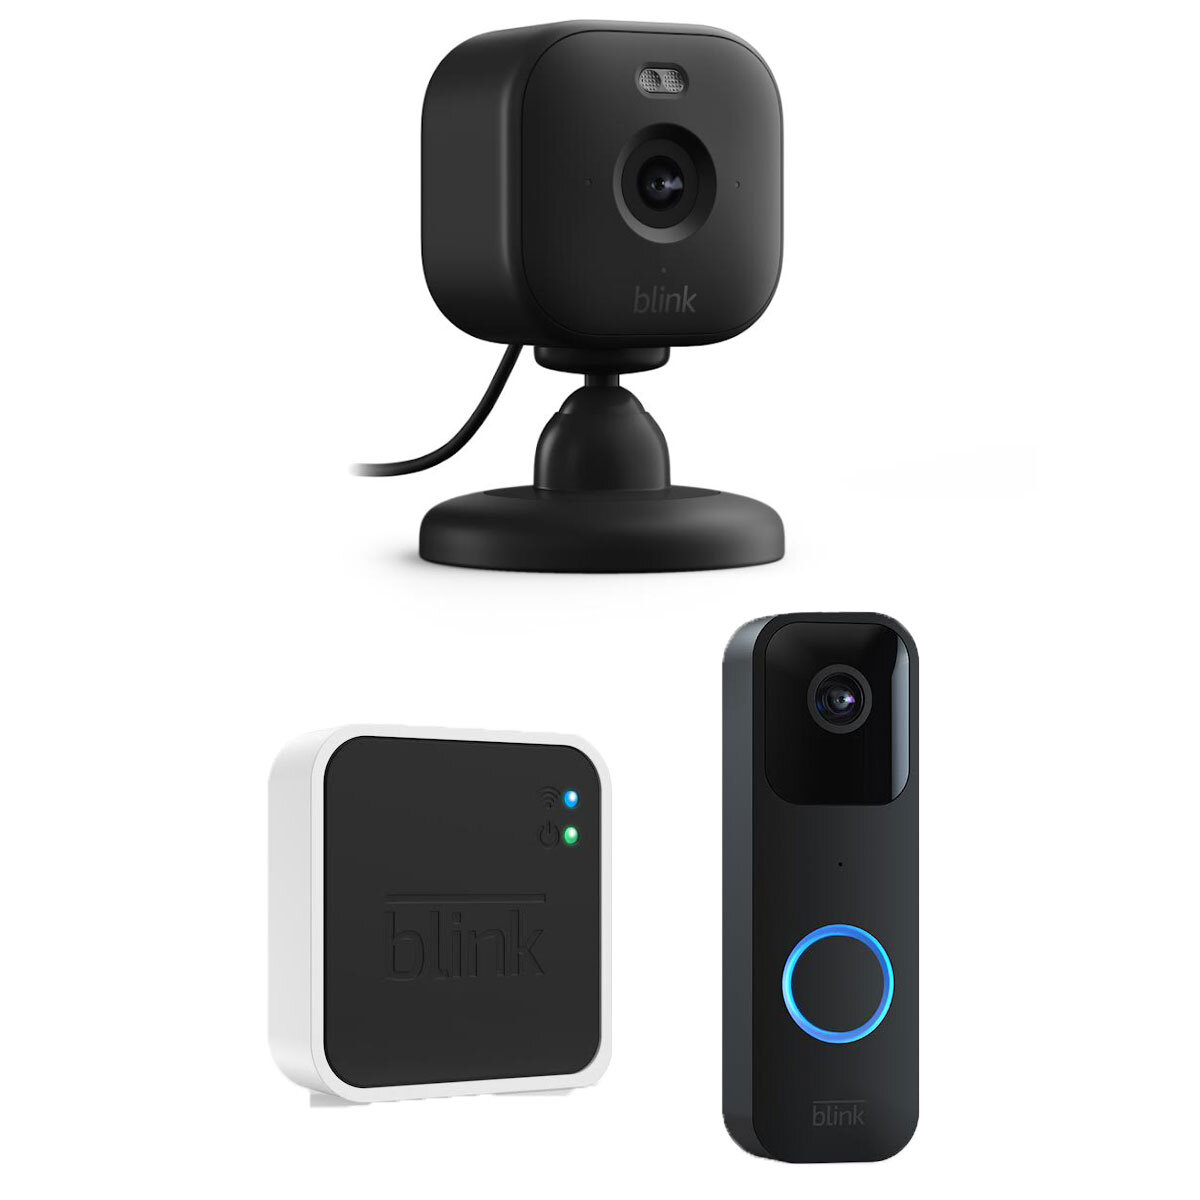 image of camera and doorbell